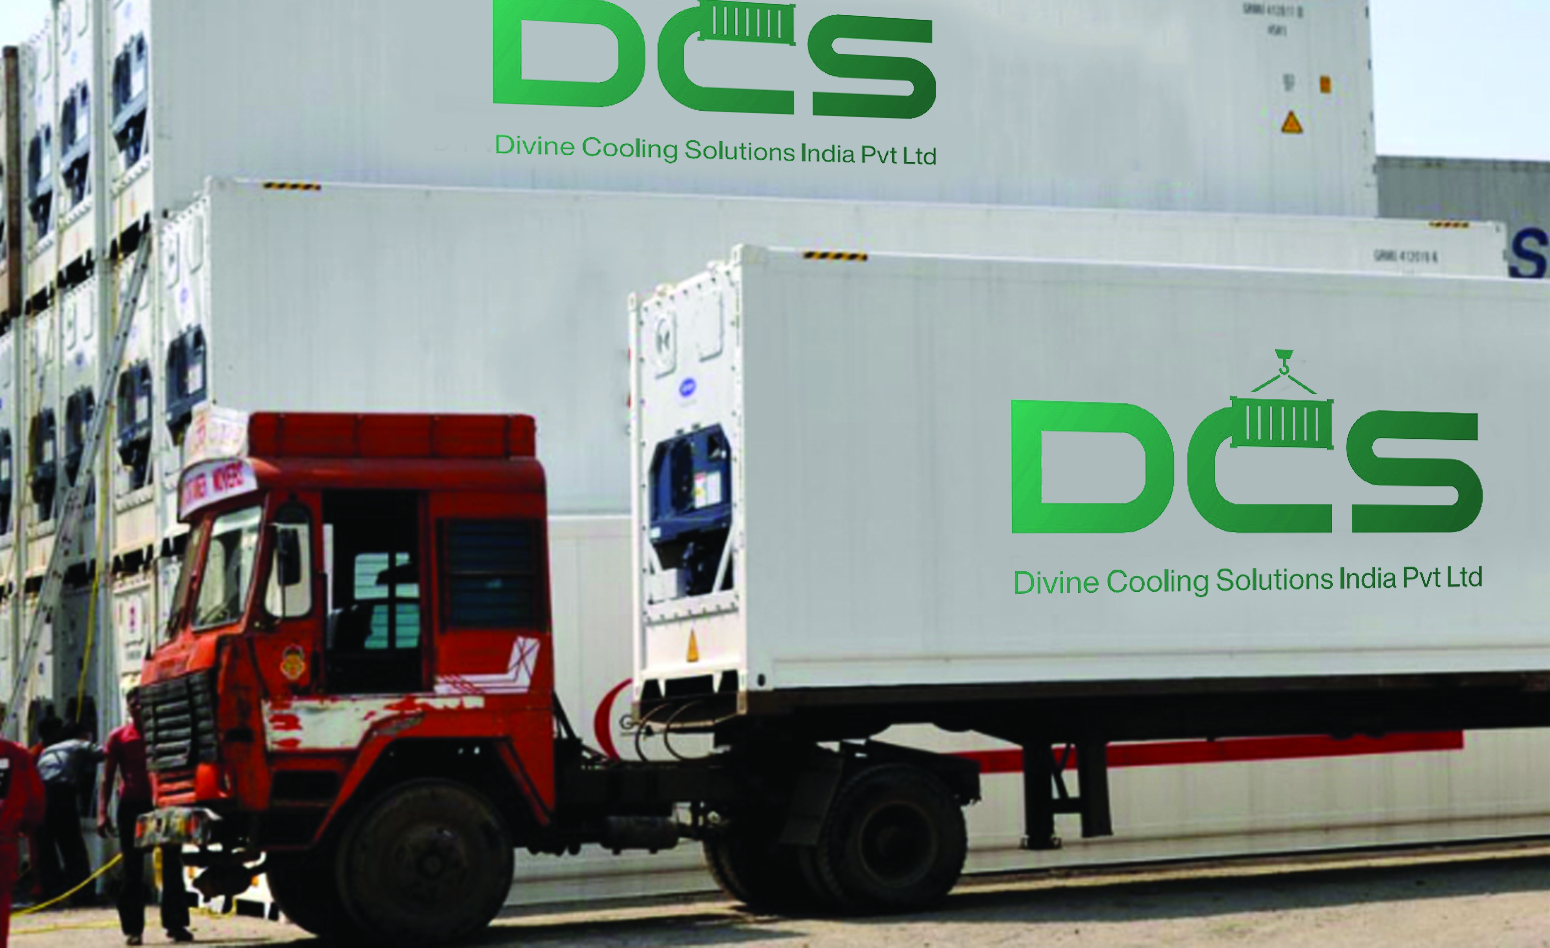 Container Transport Services